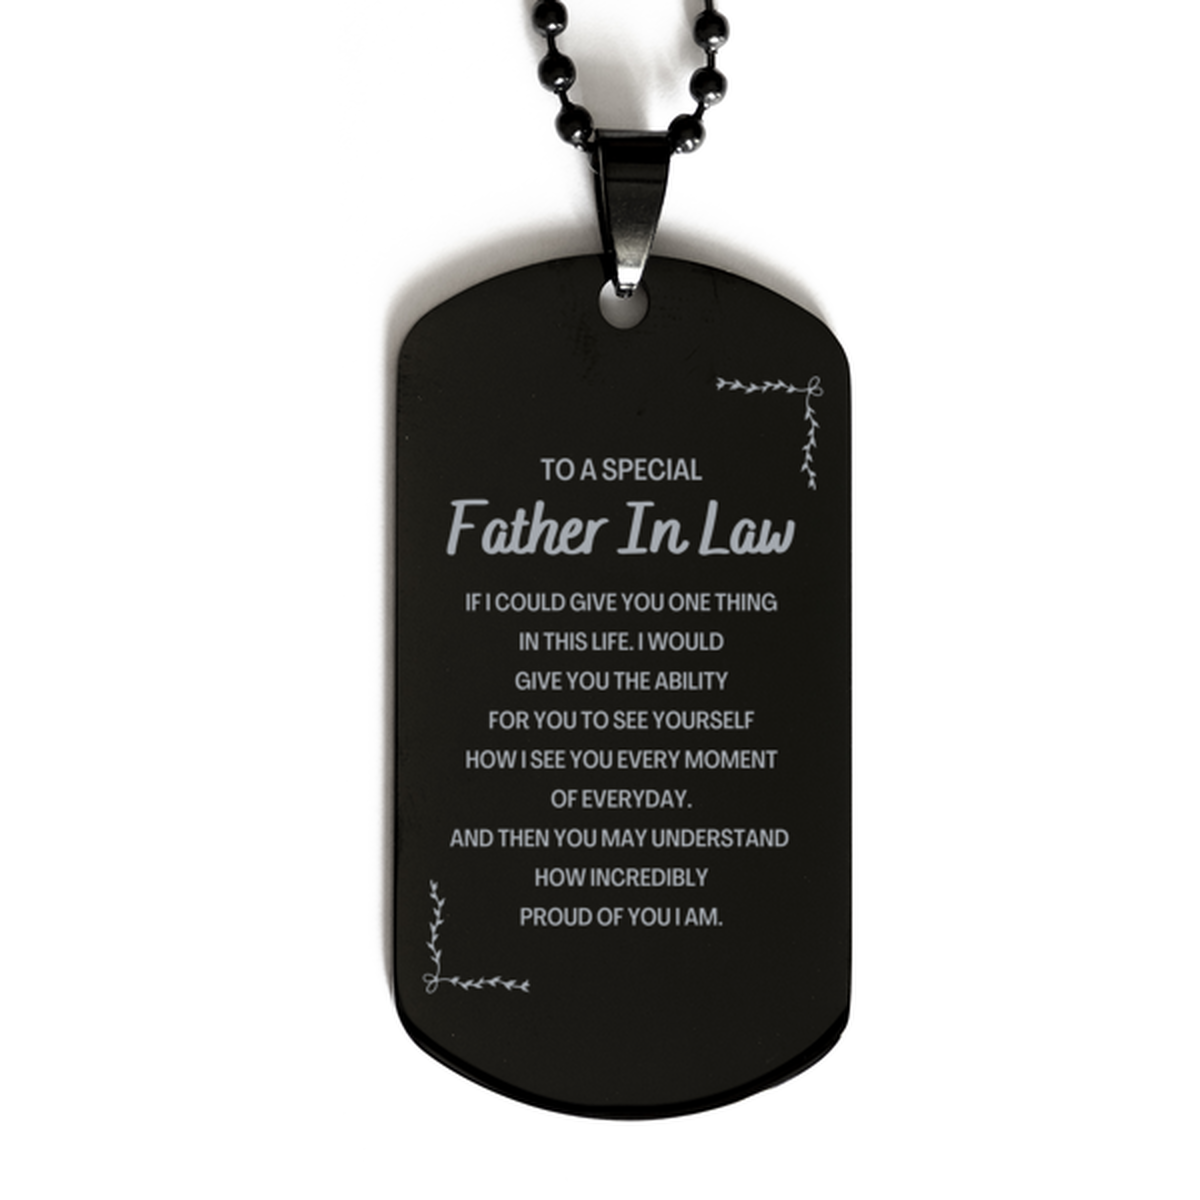 To My Father In Law Black Dog Tag, Gifts For Father In Law Engraved, Inspirational Gifts for Christmas Birthday, Epic Gifts for Father In Law To A Special Father In Law how incredibly proud of you I am